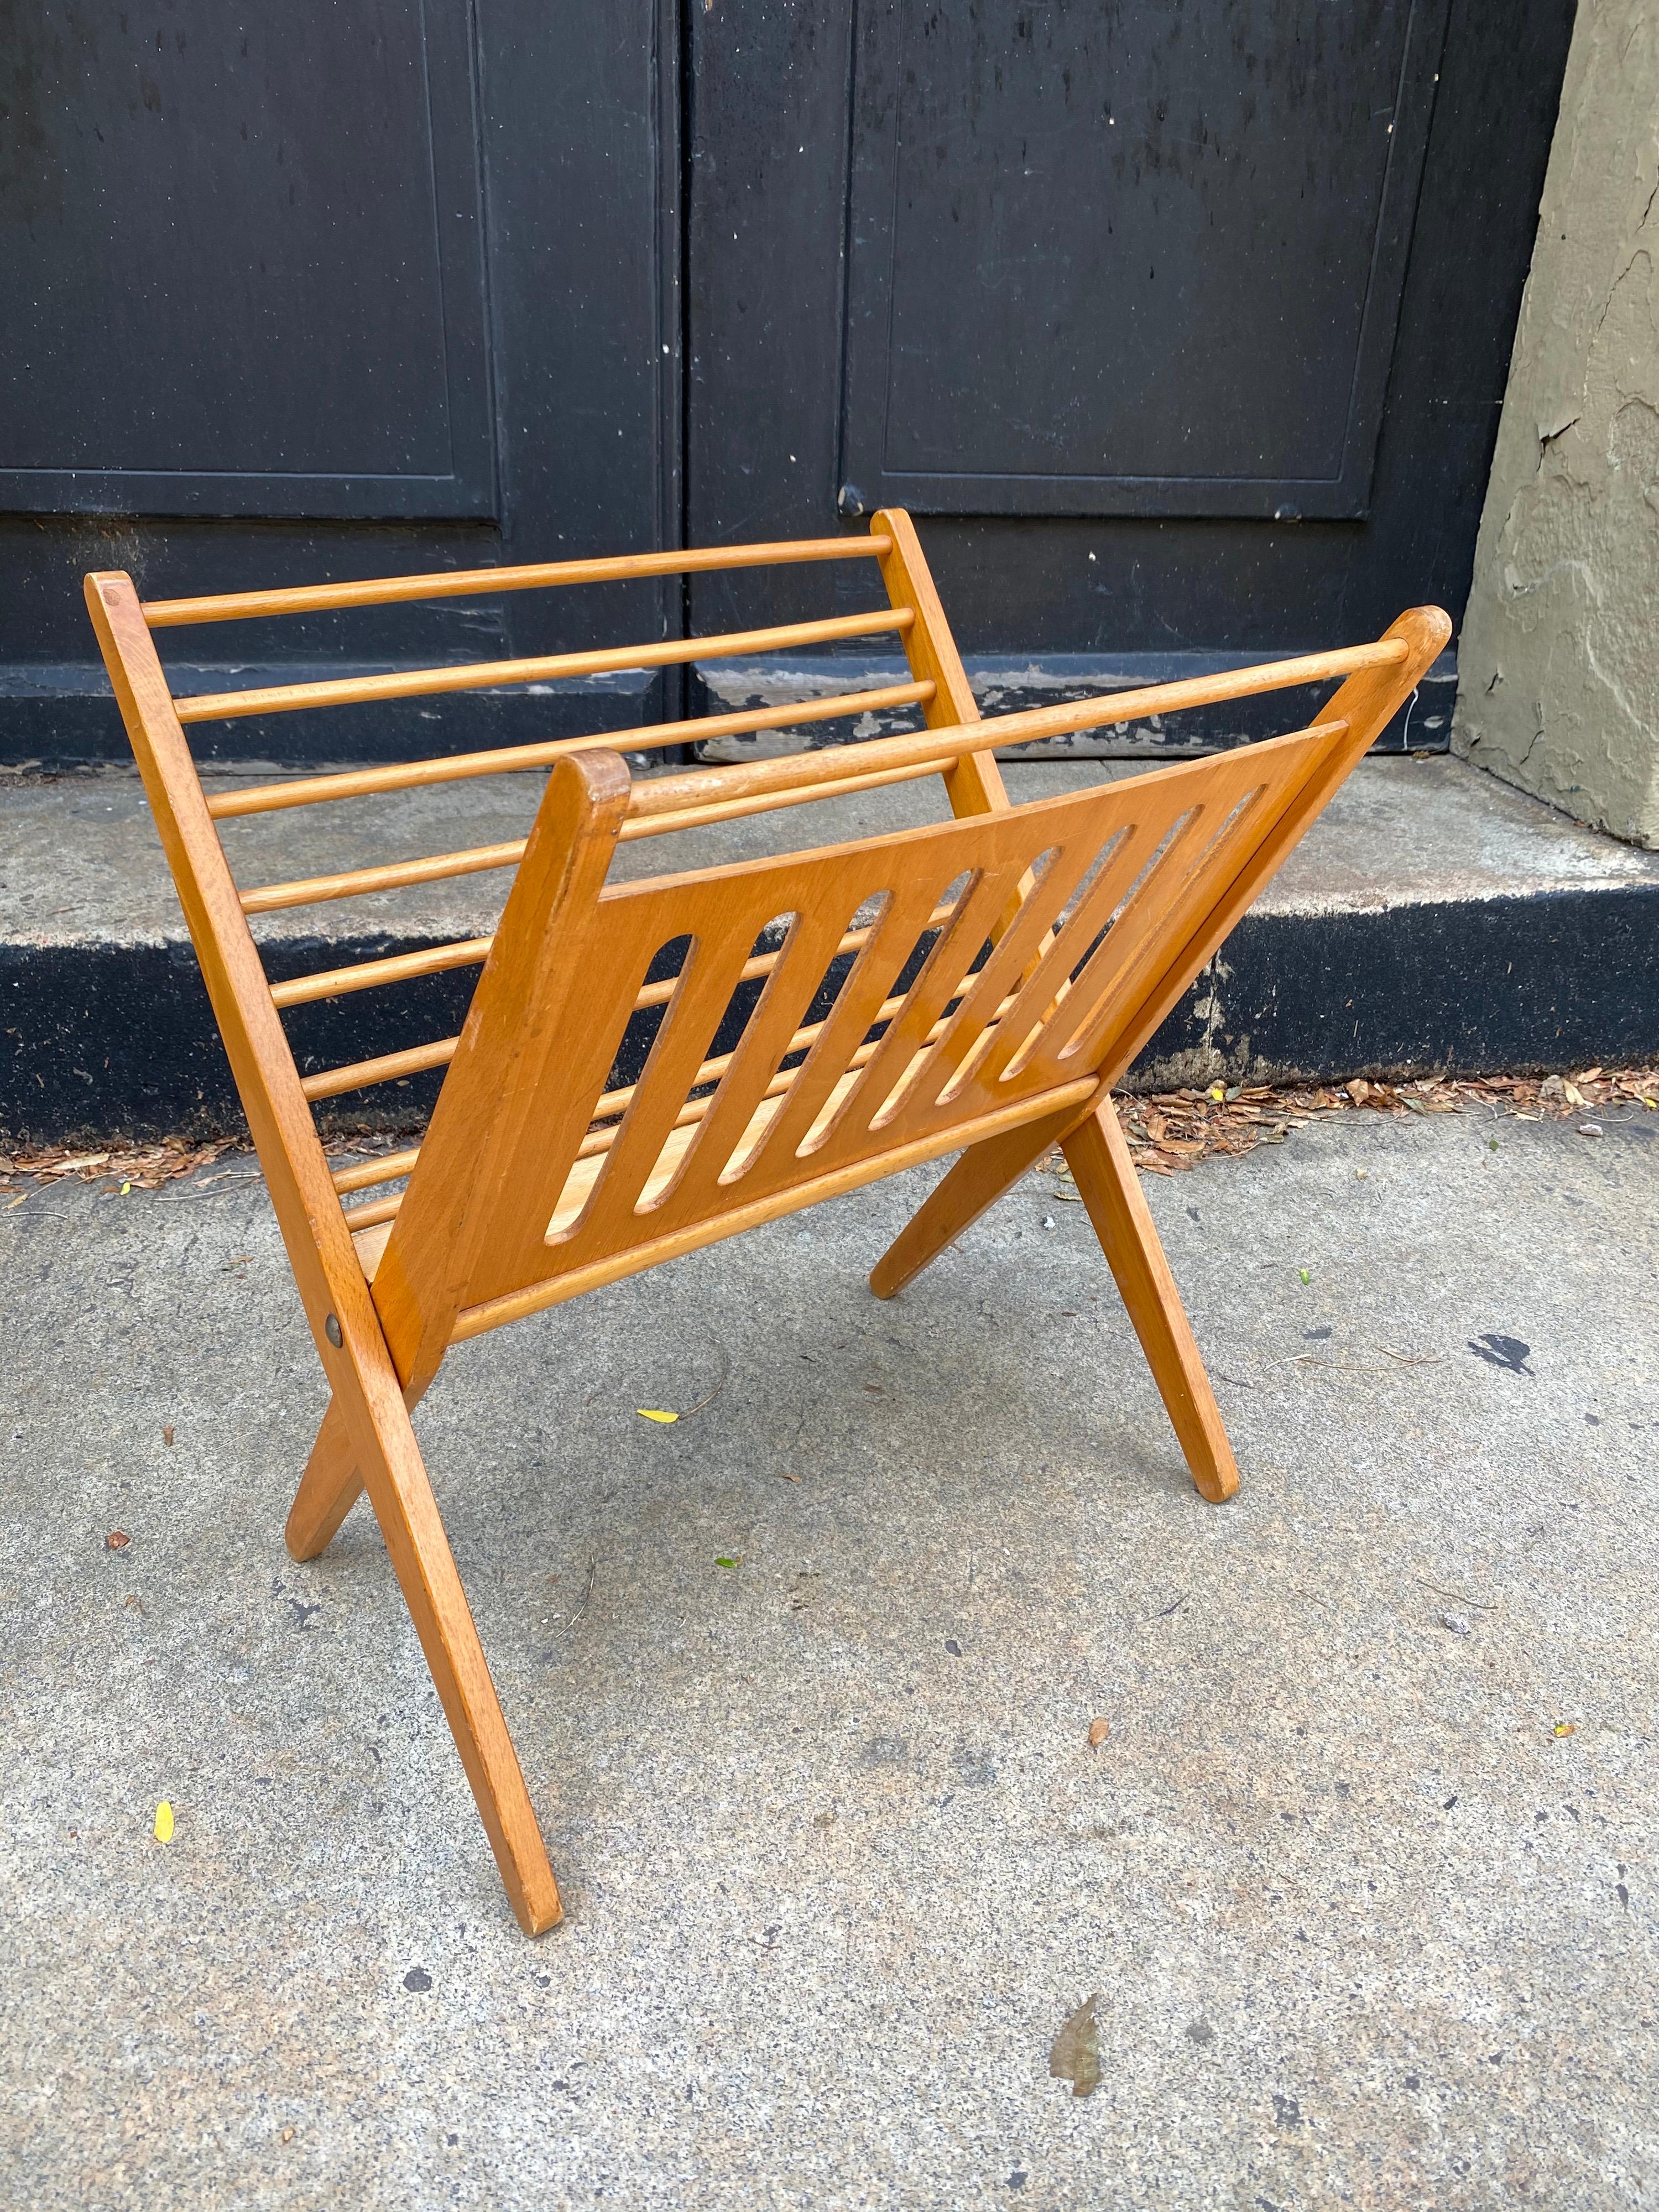 1970's folding magazine rack. 1970's Produced in Yugoslavia. Nice design with wood dowels and a plywood cut out panel.